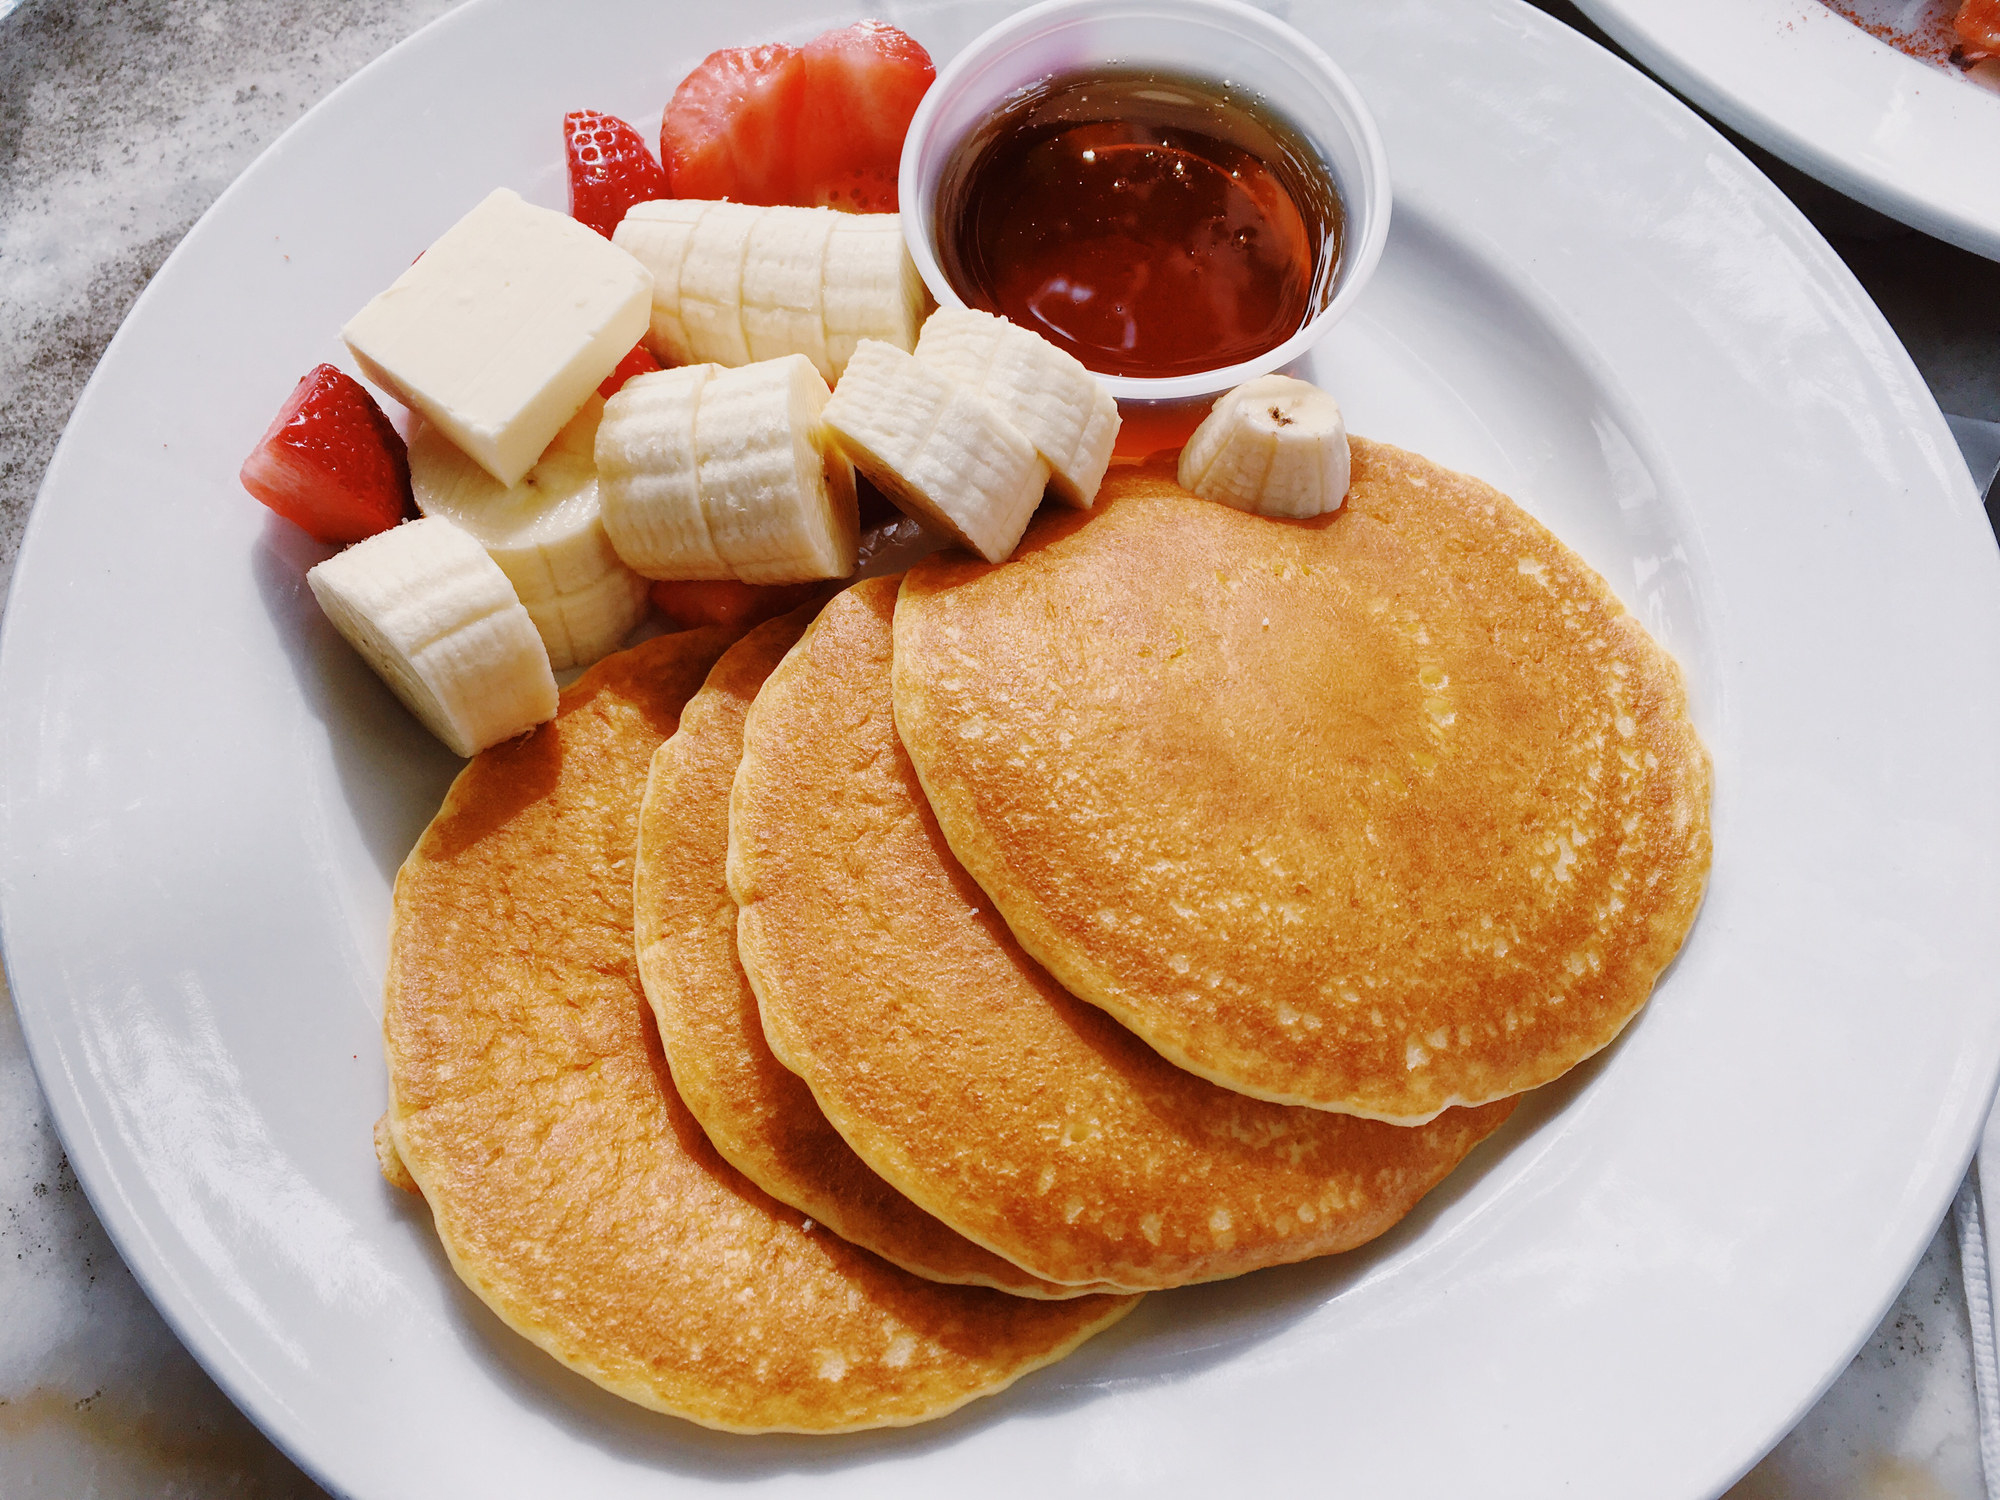 Pancakes on a plate with banana, strawberry and maple syrup.